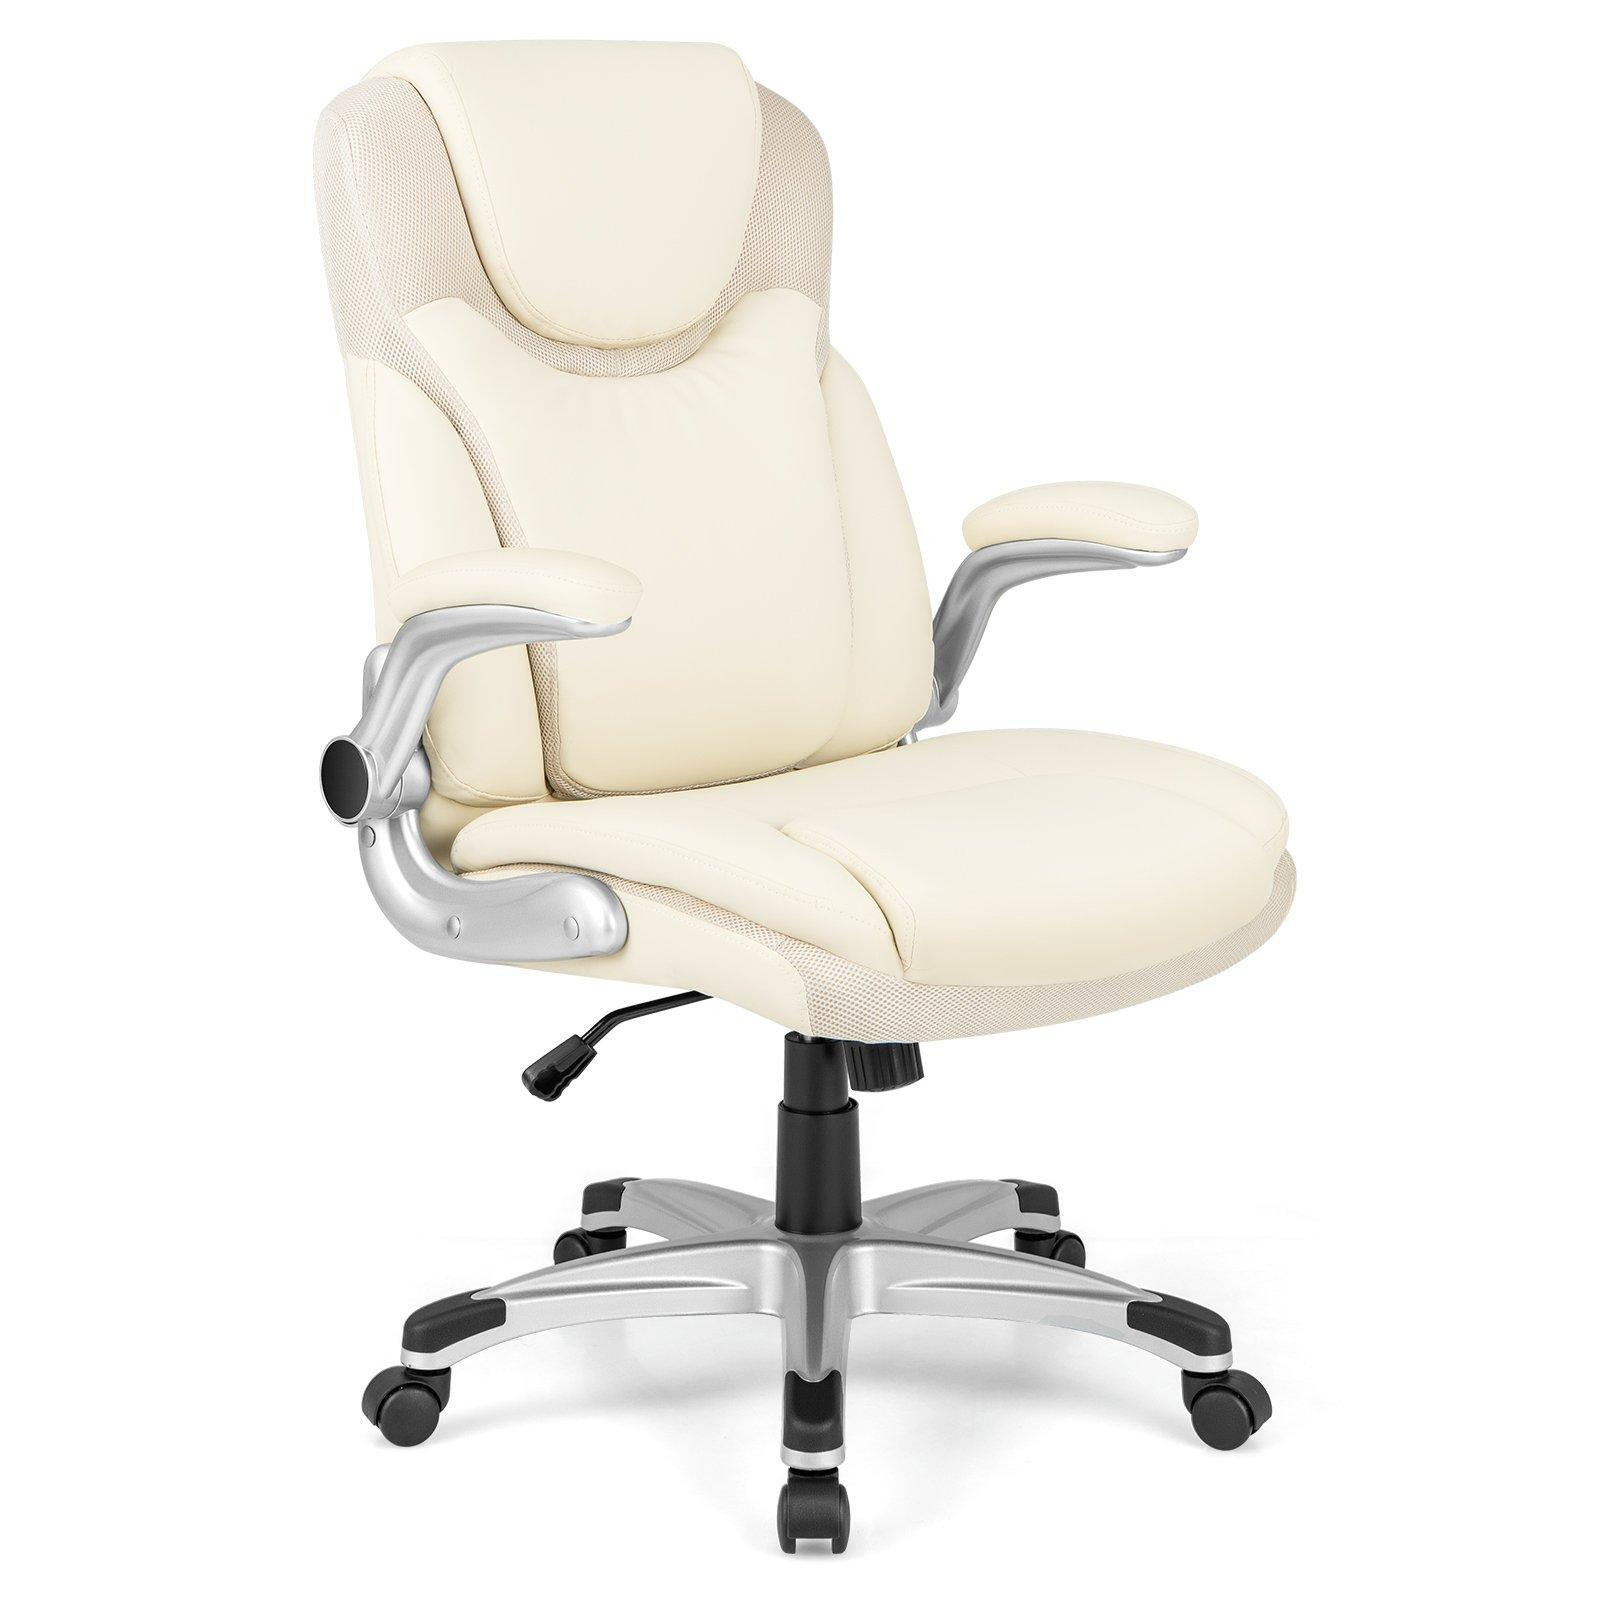 Ergonomic Office Task Chair Swivel PU Leather Executive Chair W/ Rock Function - image 1